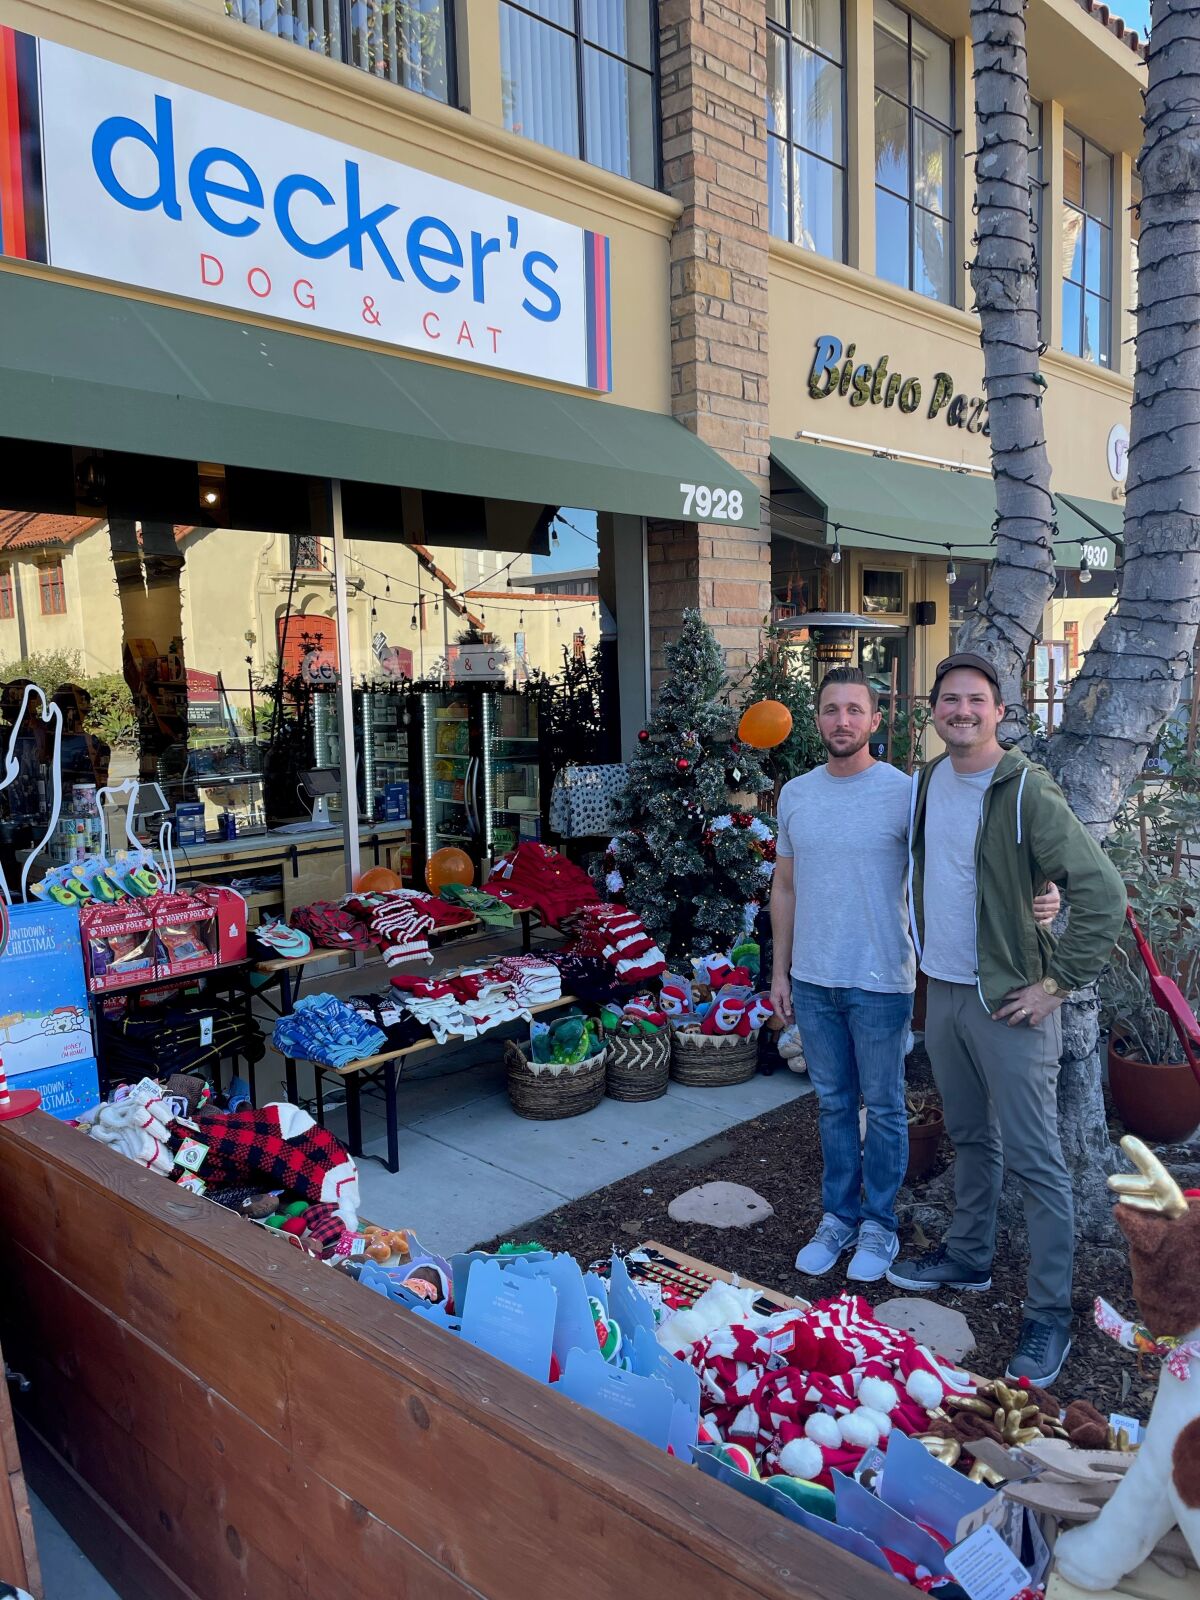 Decker's Dog & Cat employee Emerson Lowrey and owner Cody Decker set up an outdoor display for Small Business Saturday.